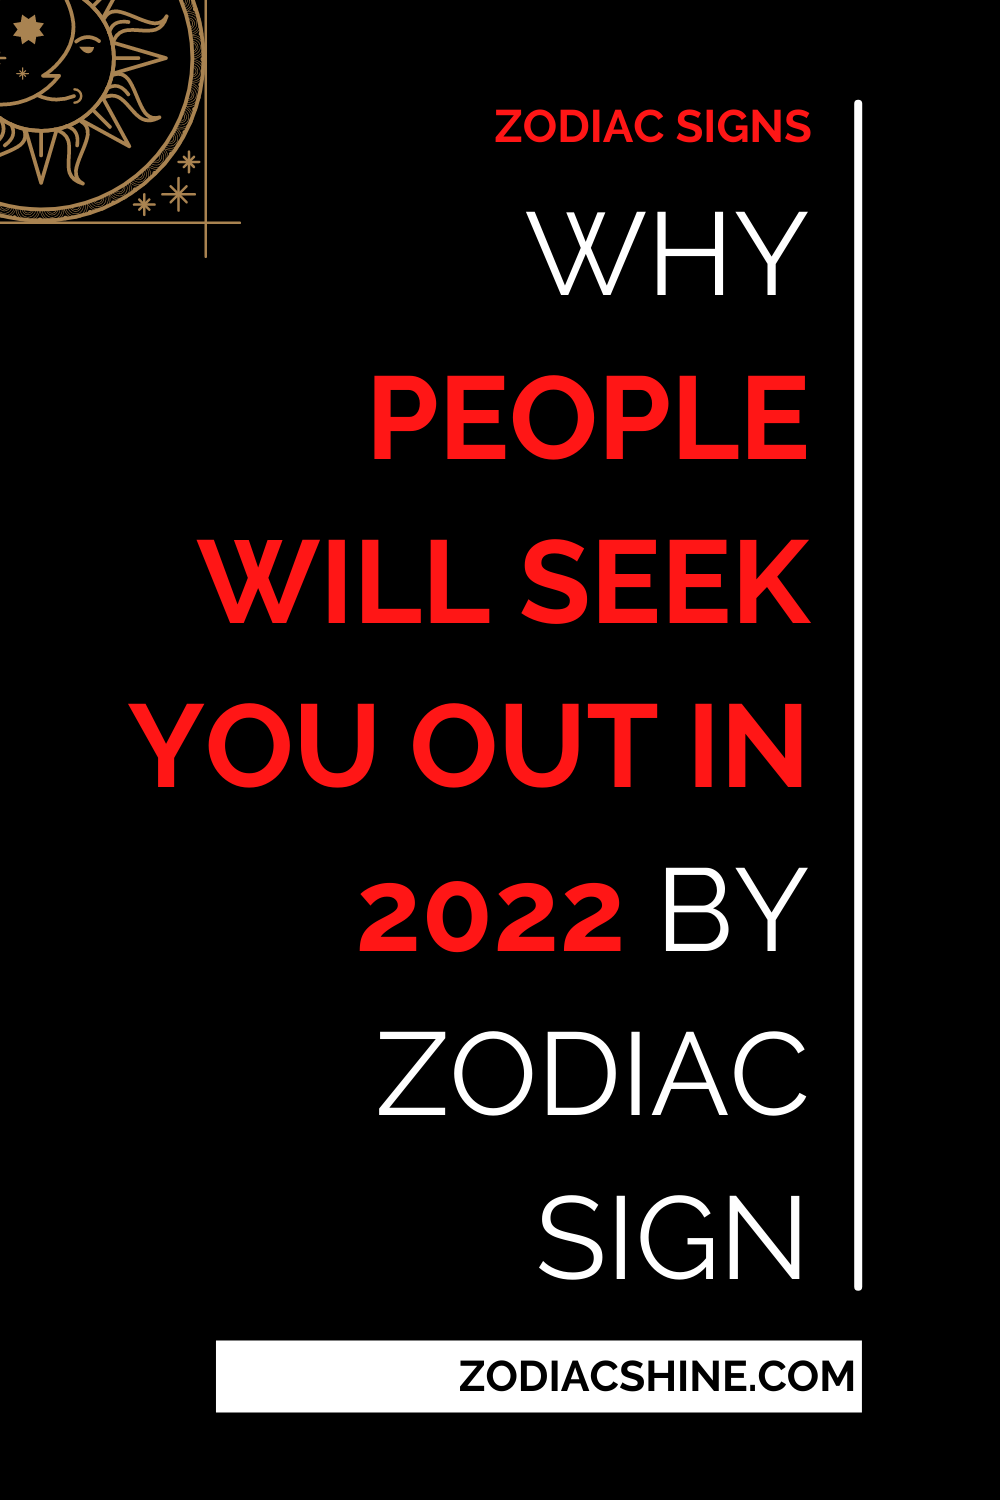 Why People Will Seek You Out In 2022 By Zodiac Sign